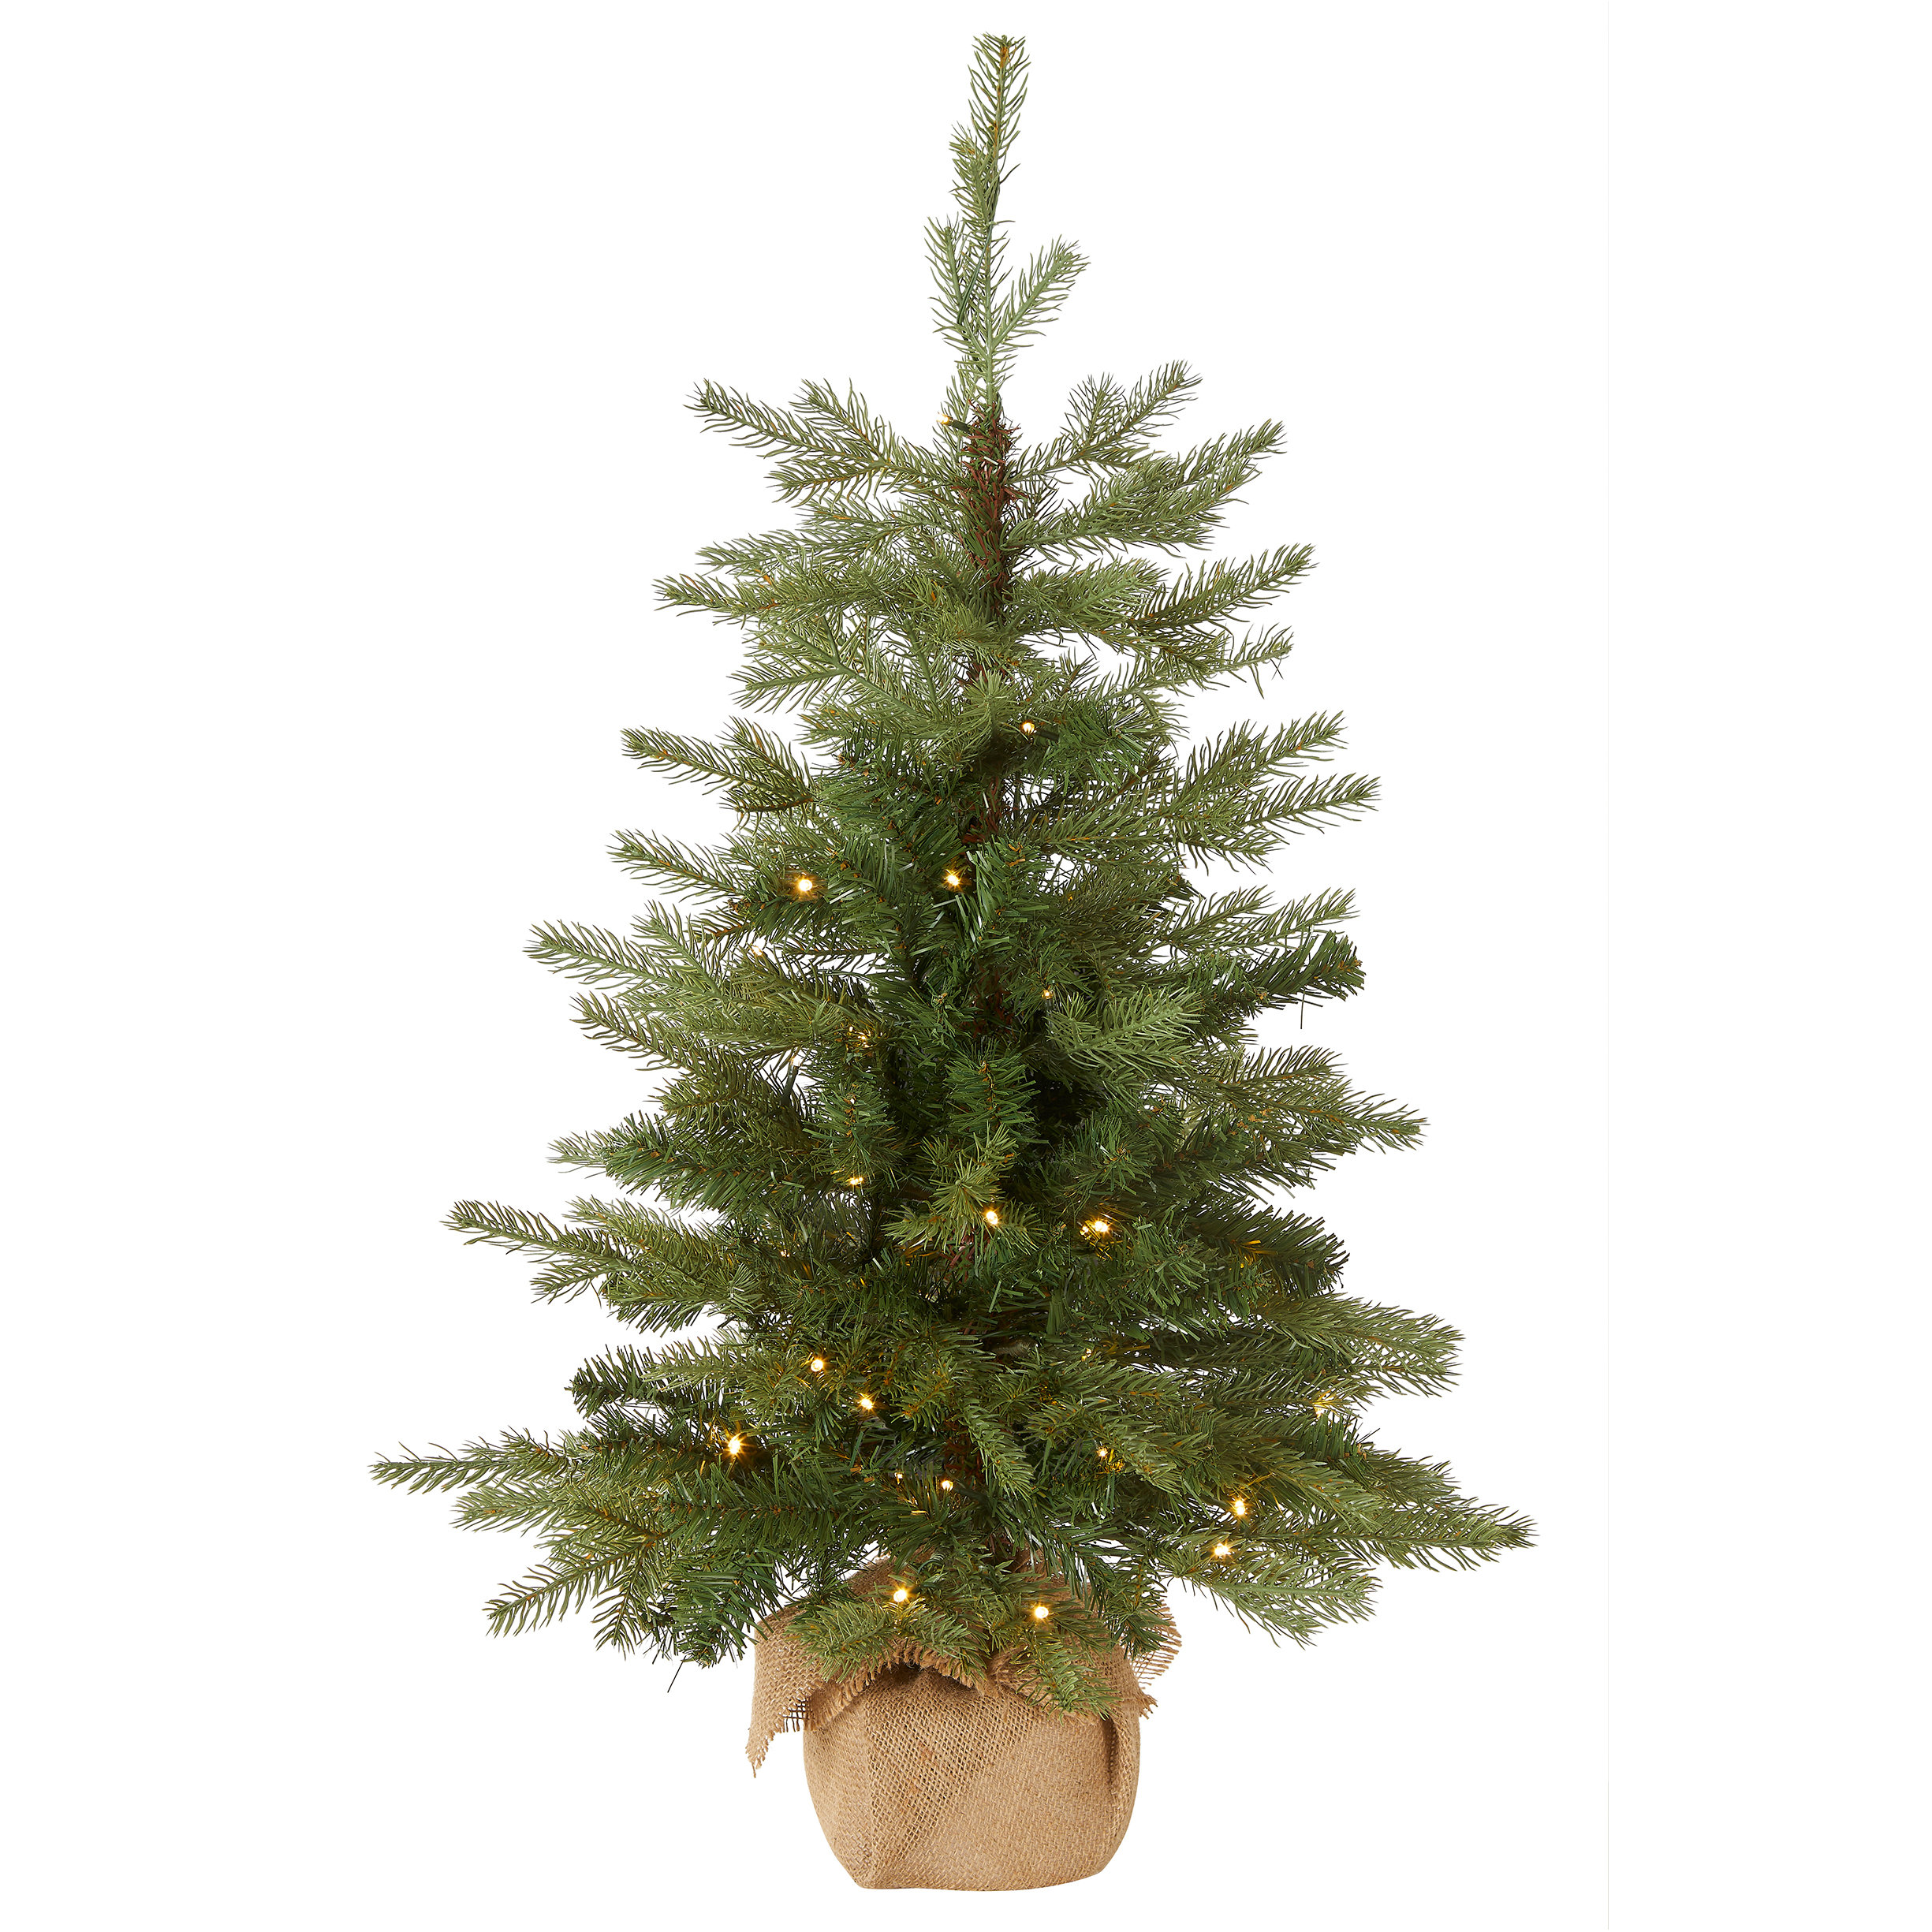 Sand & Stable Belson 3' Lighted Spruce Christmas Tree & Reviews | Wayfair